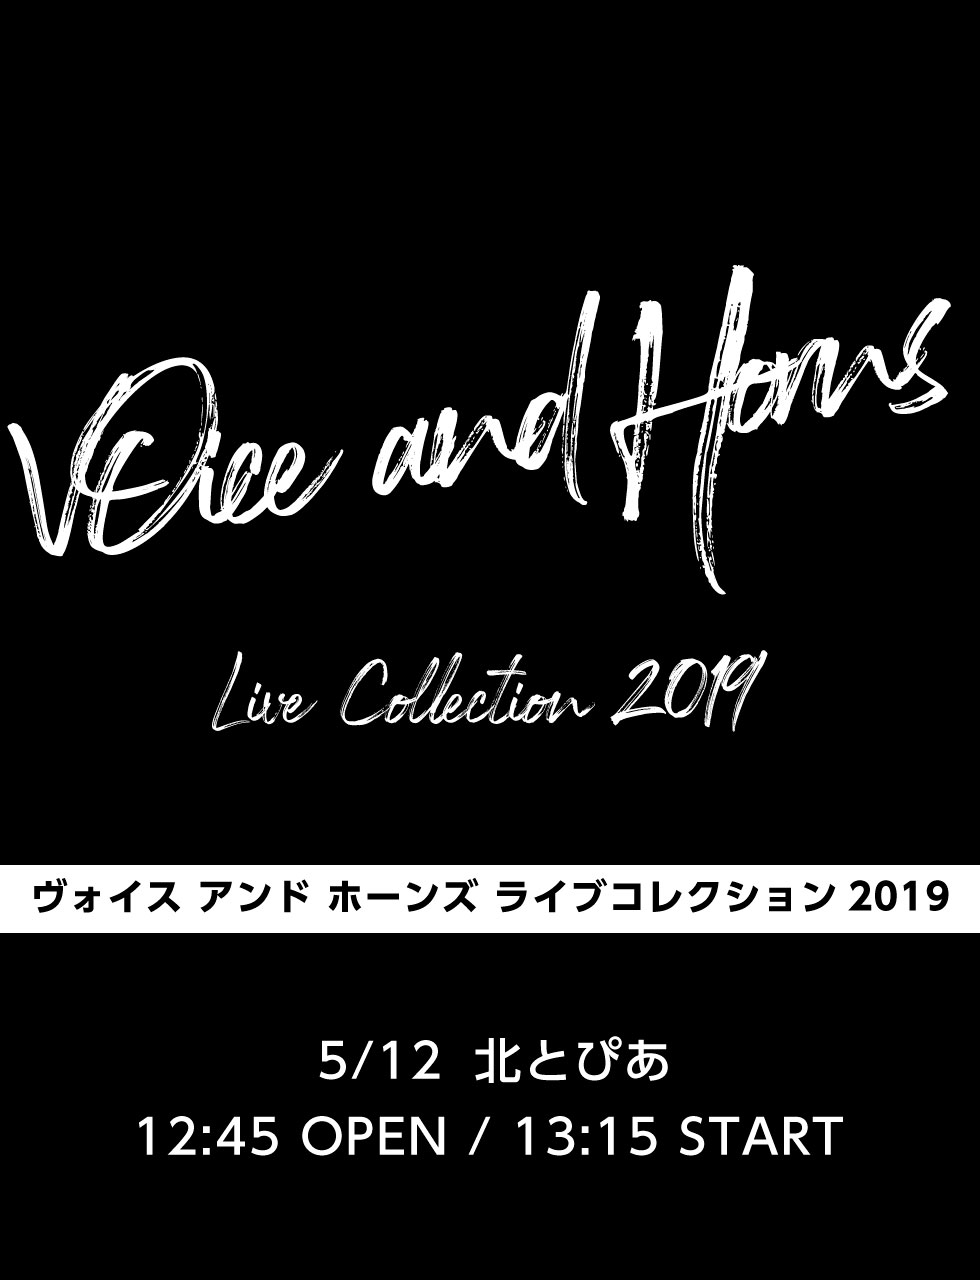 Voice&Horns Live Collection 2019